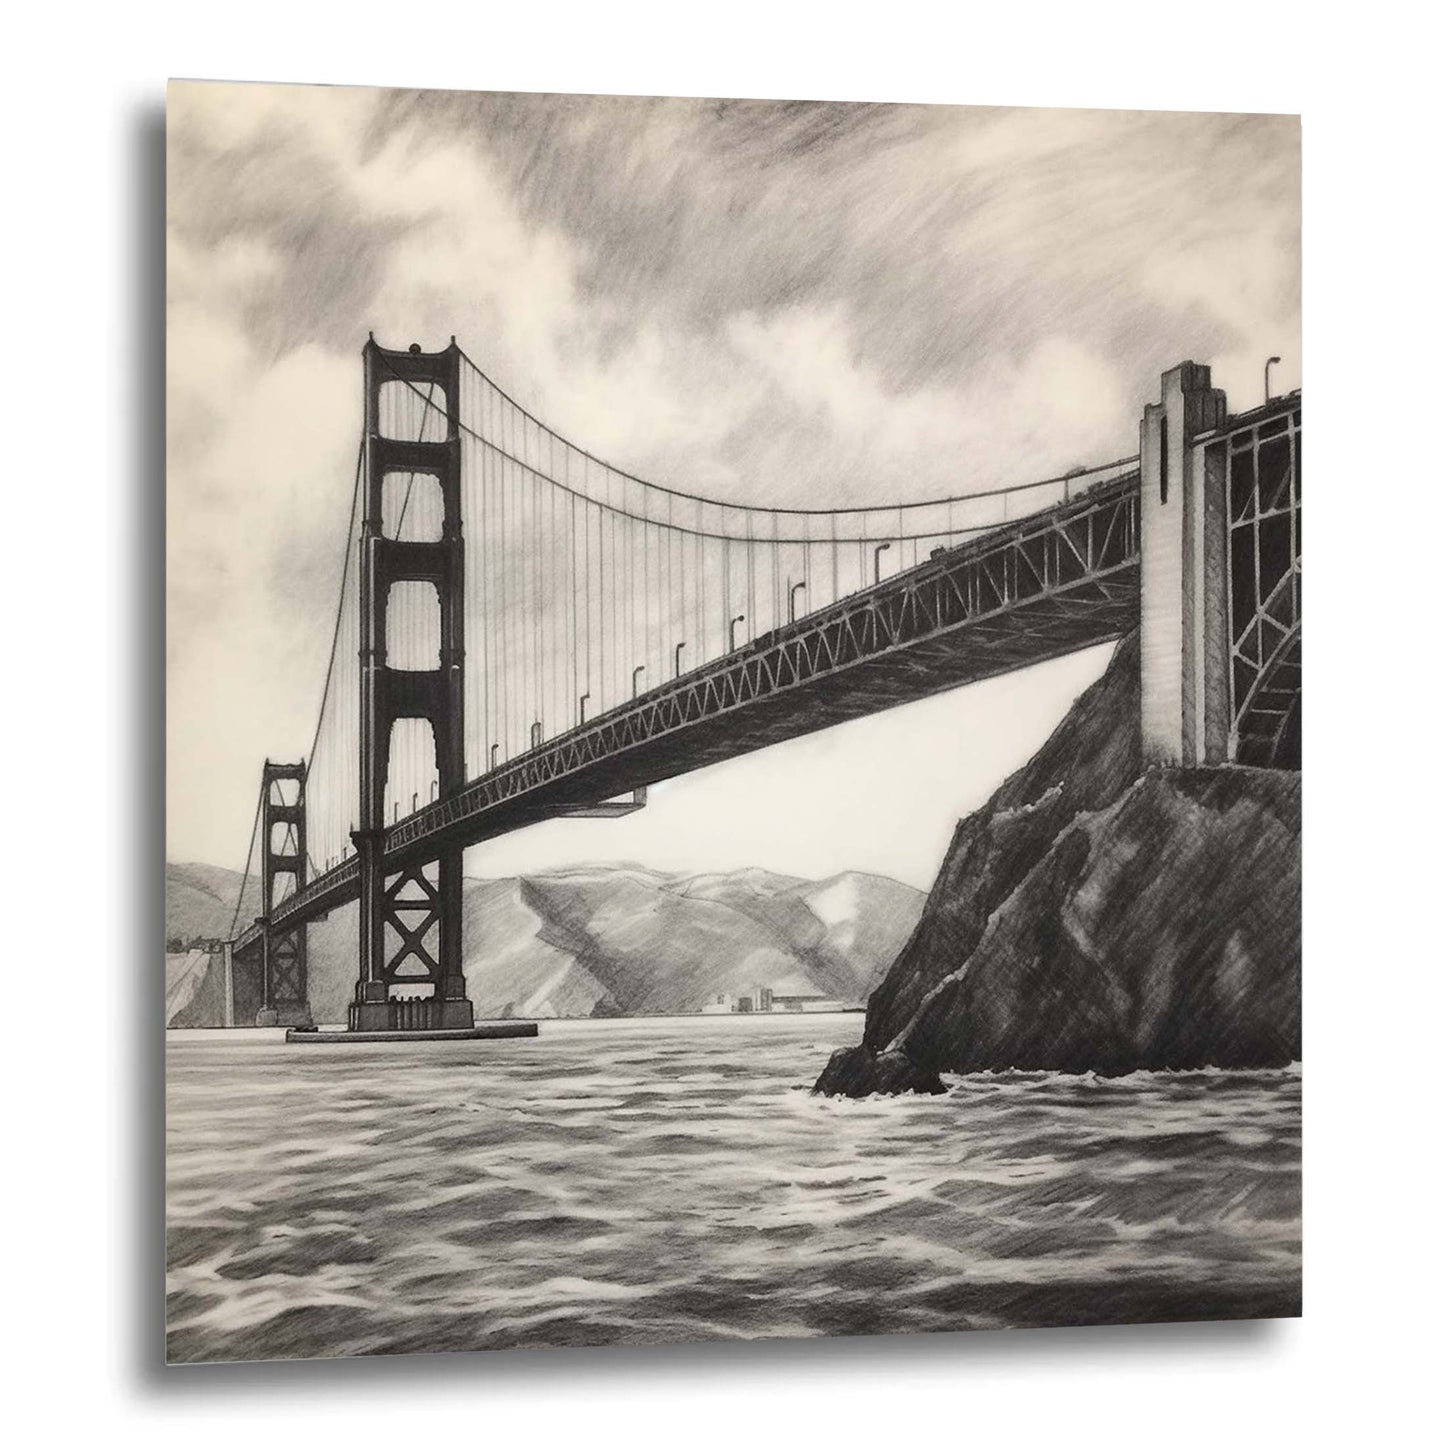 San Francisco Golden Gate Bridge - Mural in the style of a drawing